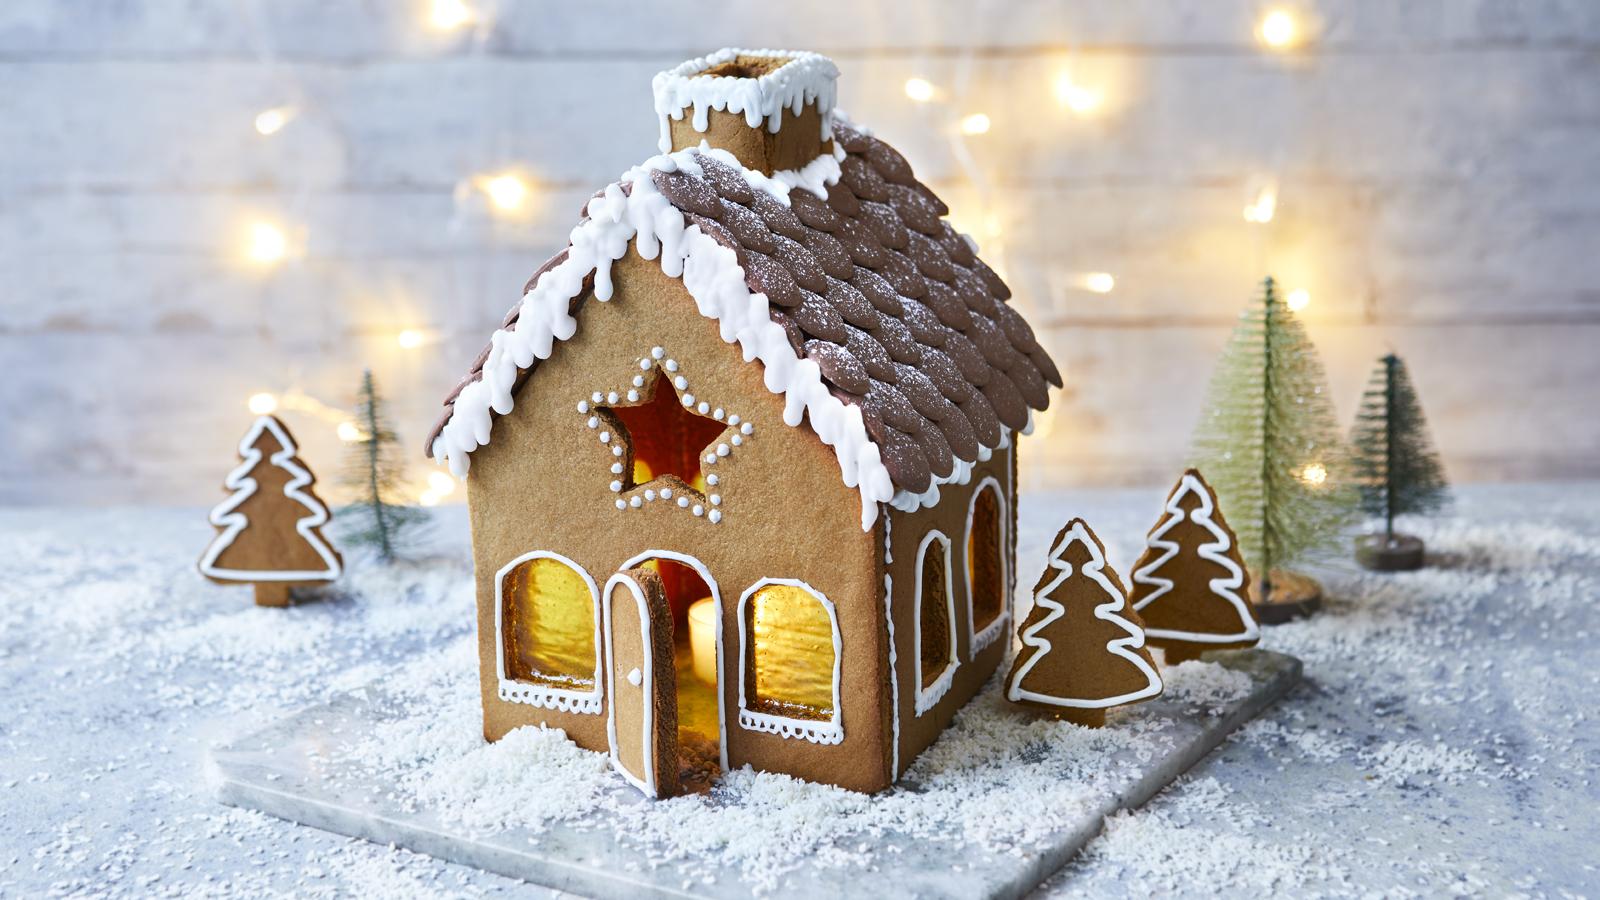 OUR FAVOURITE GINGERBREAD HOUSE RECIPE